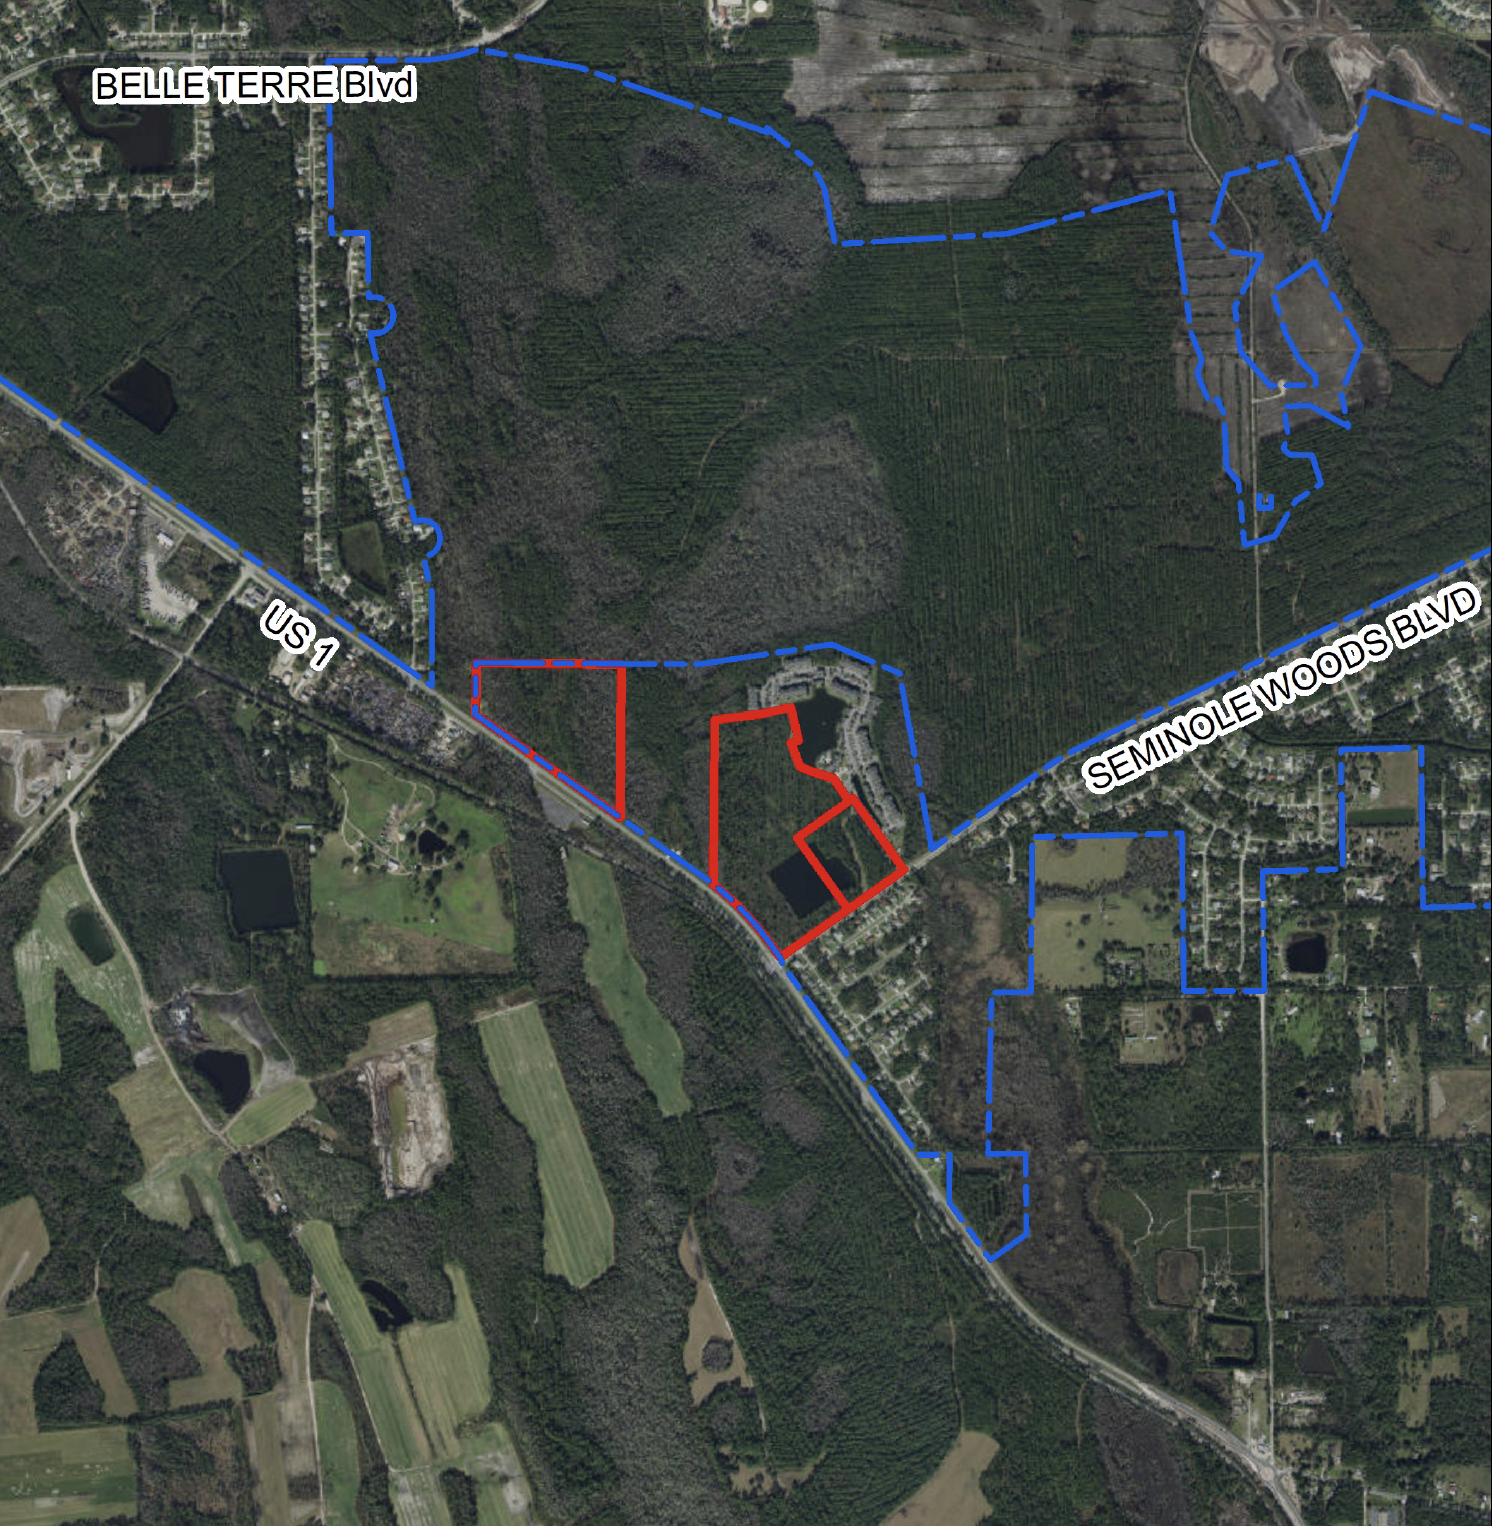 The location of the proposed Seminole Pointe development, as shown in Palm Coast planning board documents.